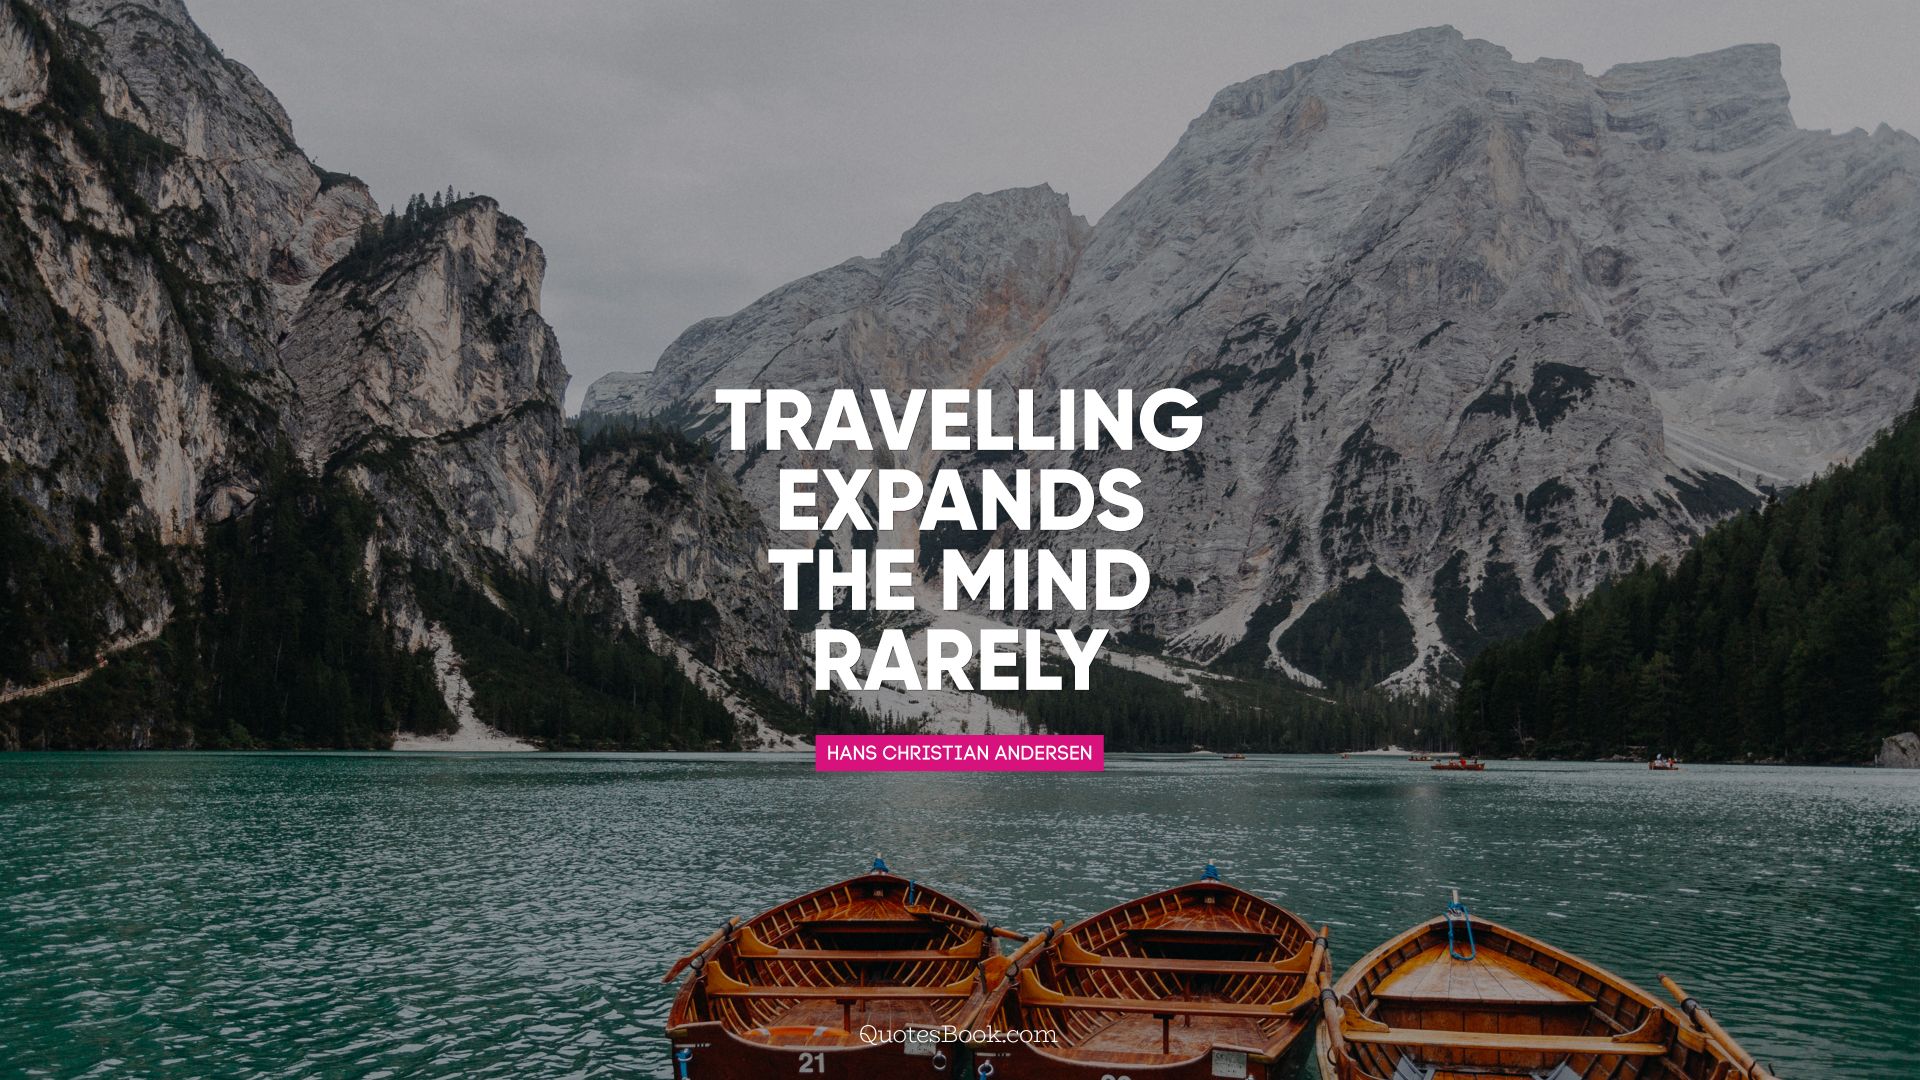 Travelling expands the mind rarely. - Quote by Hans Christian Andersen